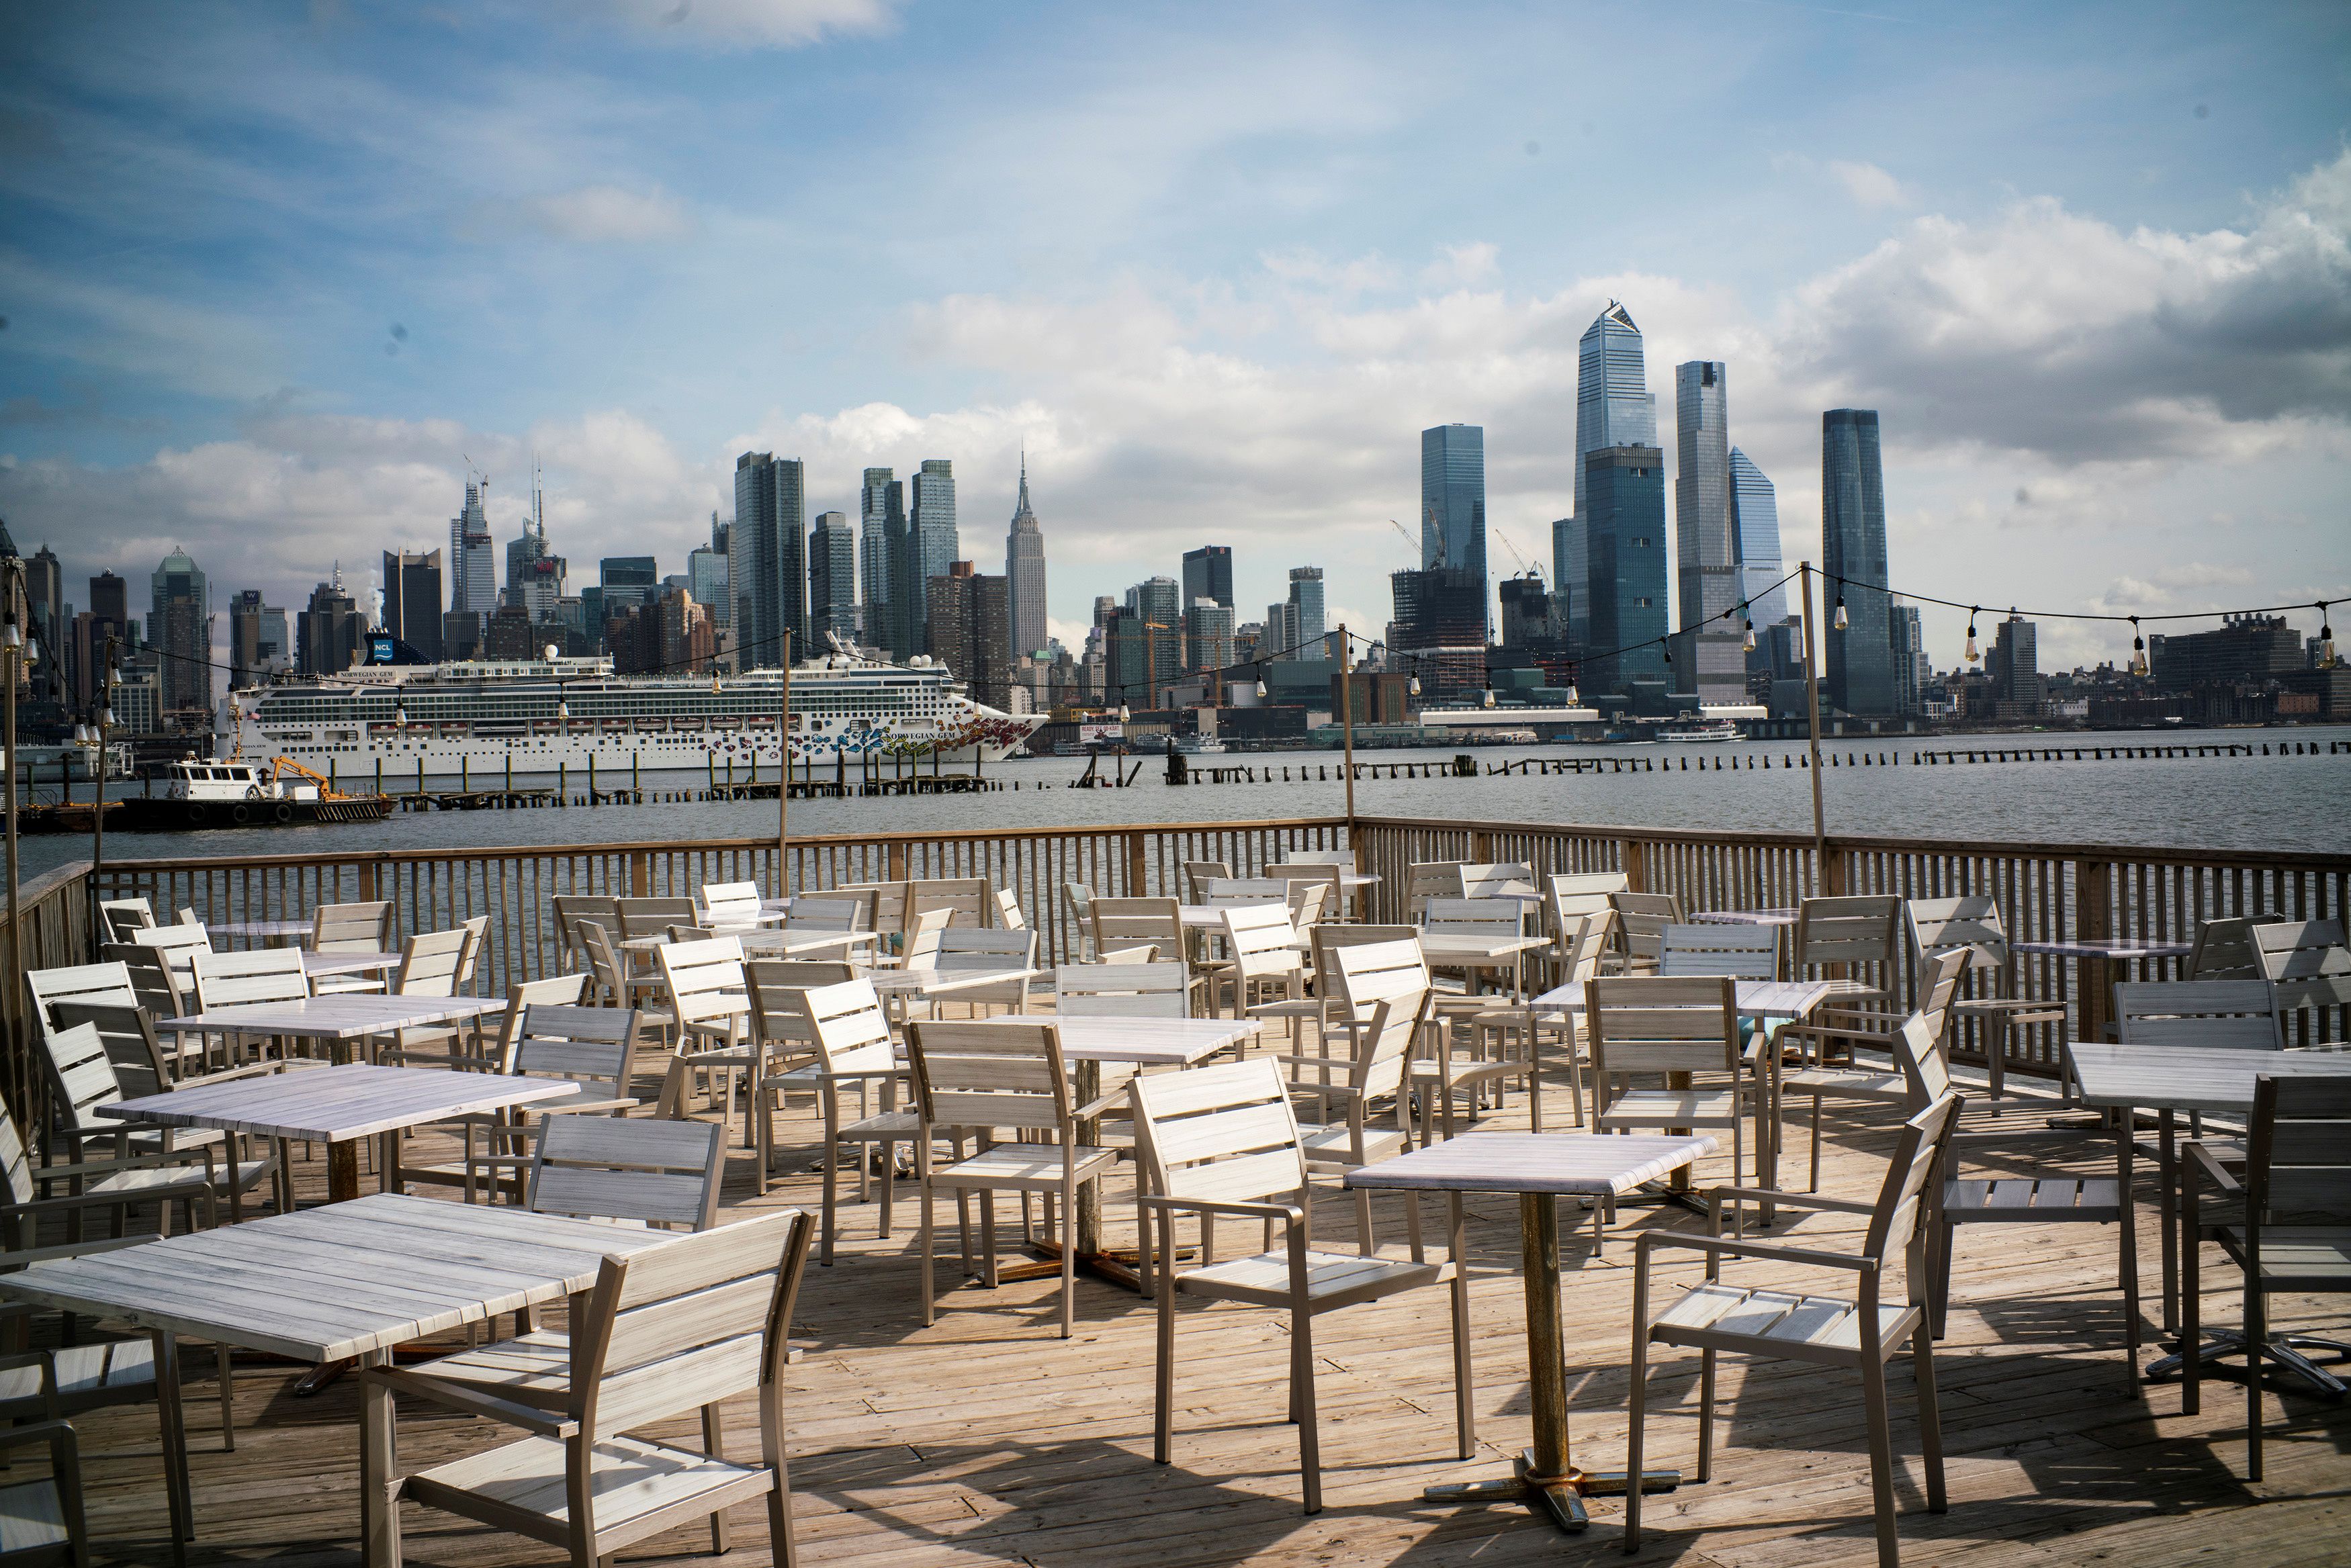 Empty chairs are seen at the deck of a local restaurant that is closed due to the outbreak of coronavirus disease (COVID-19), in Hoboken